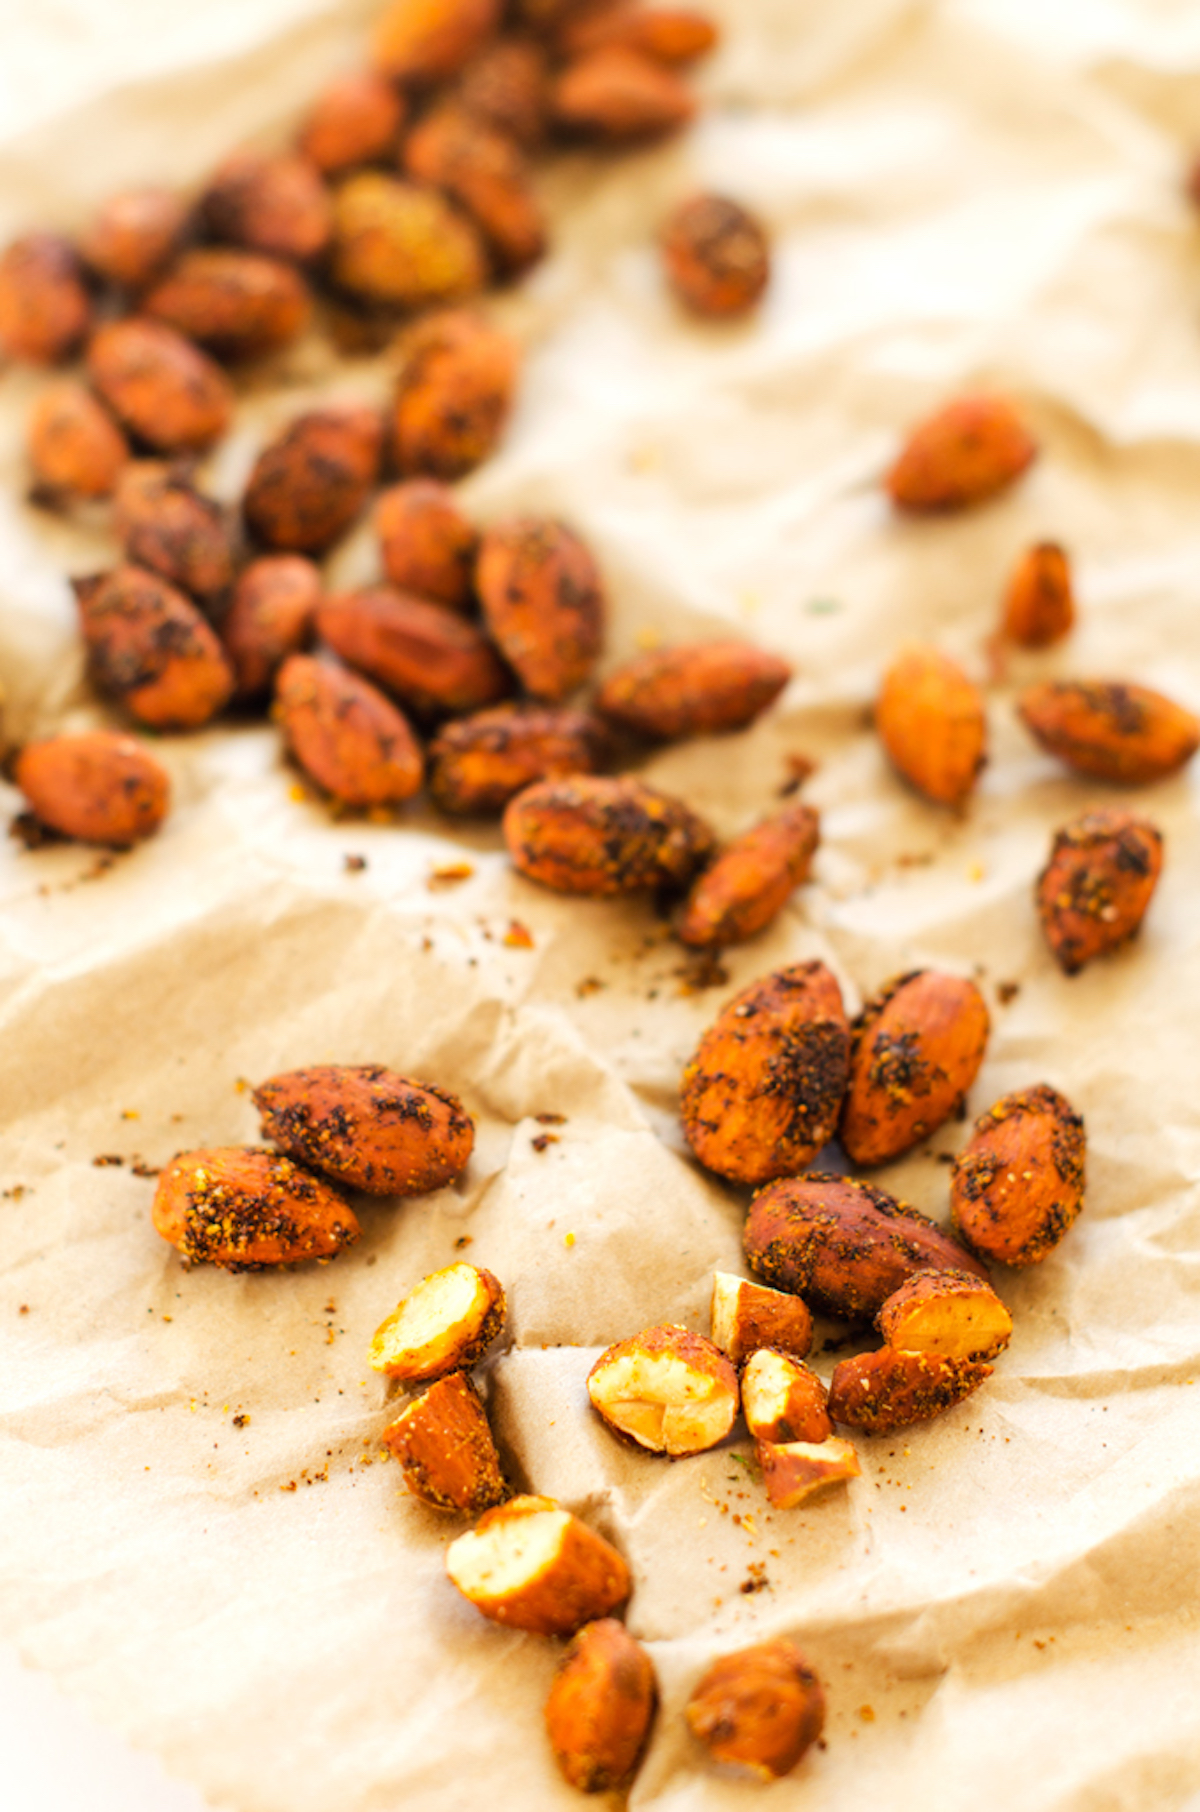 Photo of smoked almonds on parchment paper.